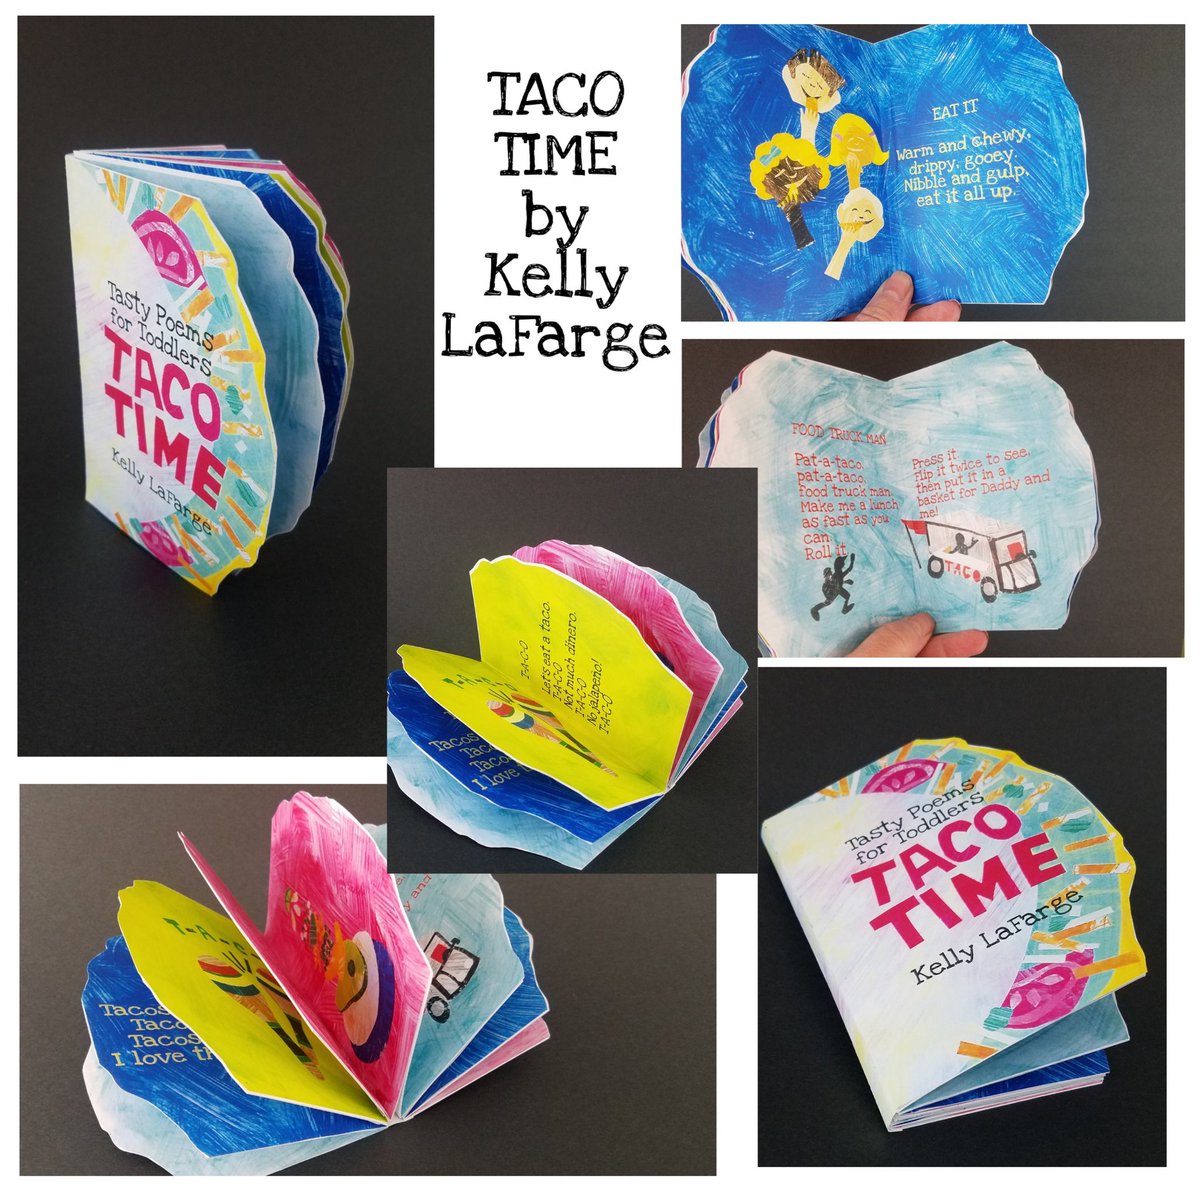 Seven delicious taco poems for toddlers in a fun, die-cut taco shapped board book!
#PitMad #boardbook #cutpaper #culturediversity #authorillustrator